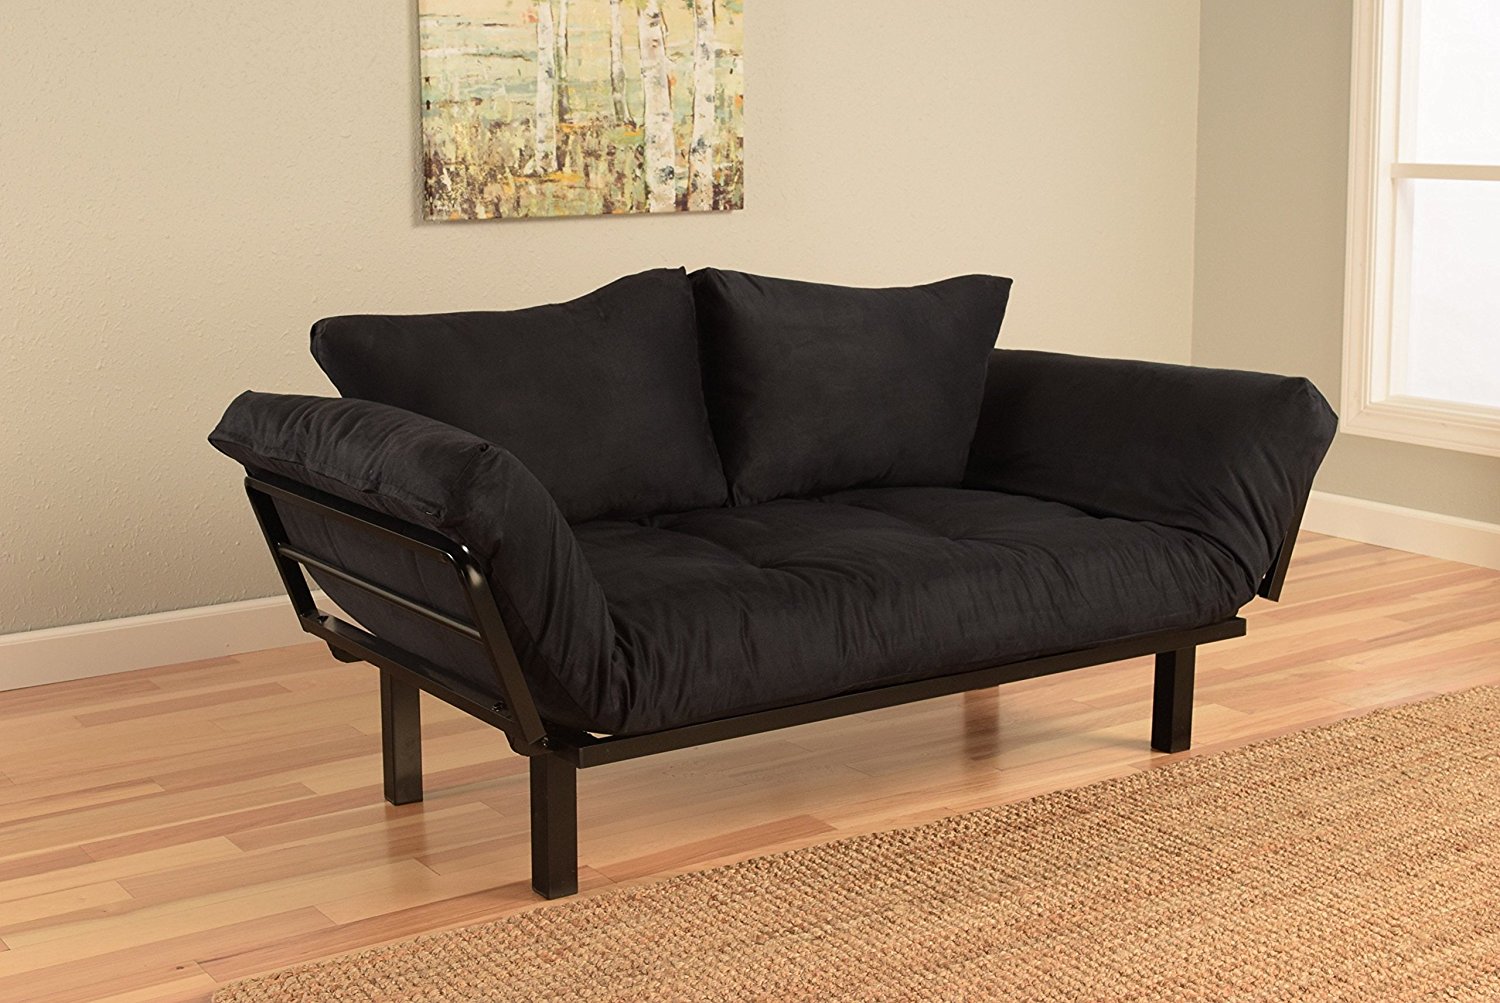 Best Futons Reviewed & Rated for Quality TheGearHunt